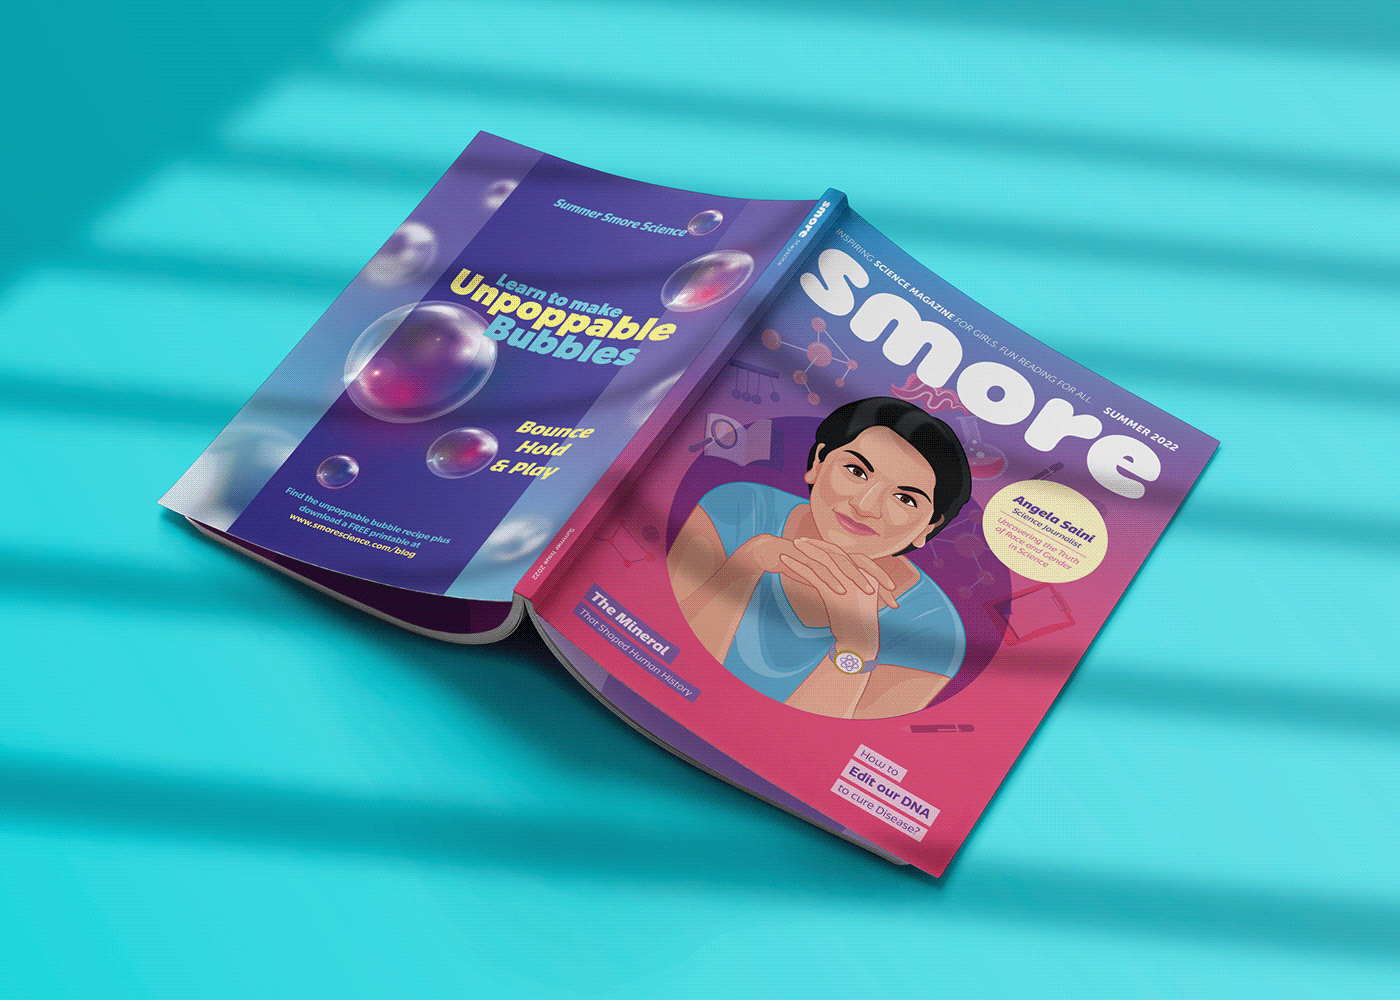 Cover of a kids science magazine named 'Smore science'